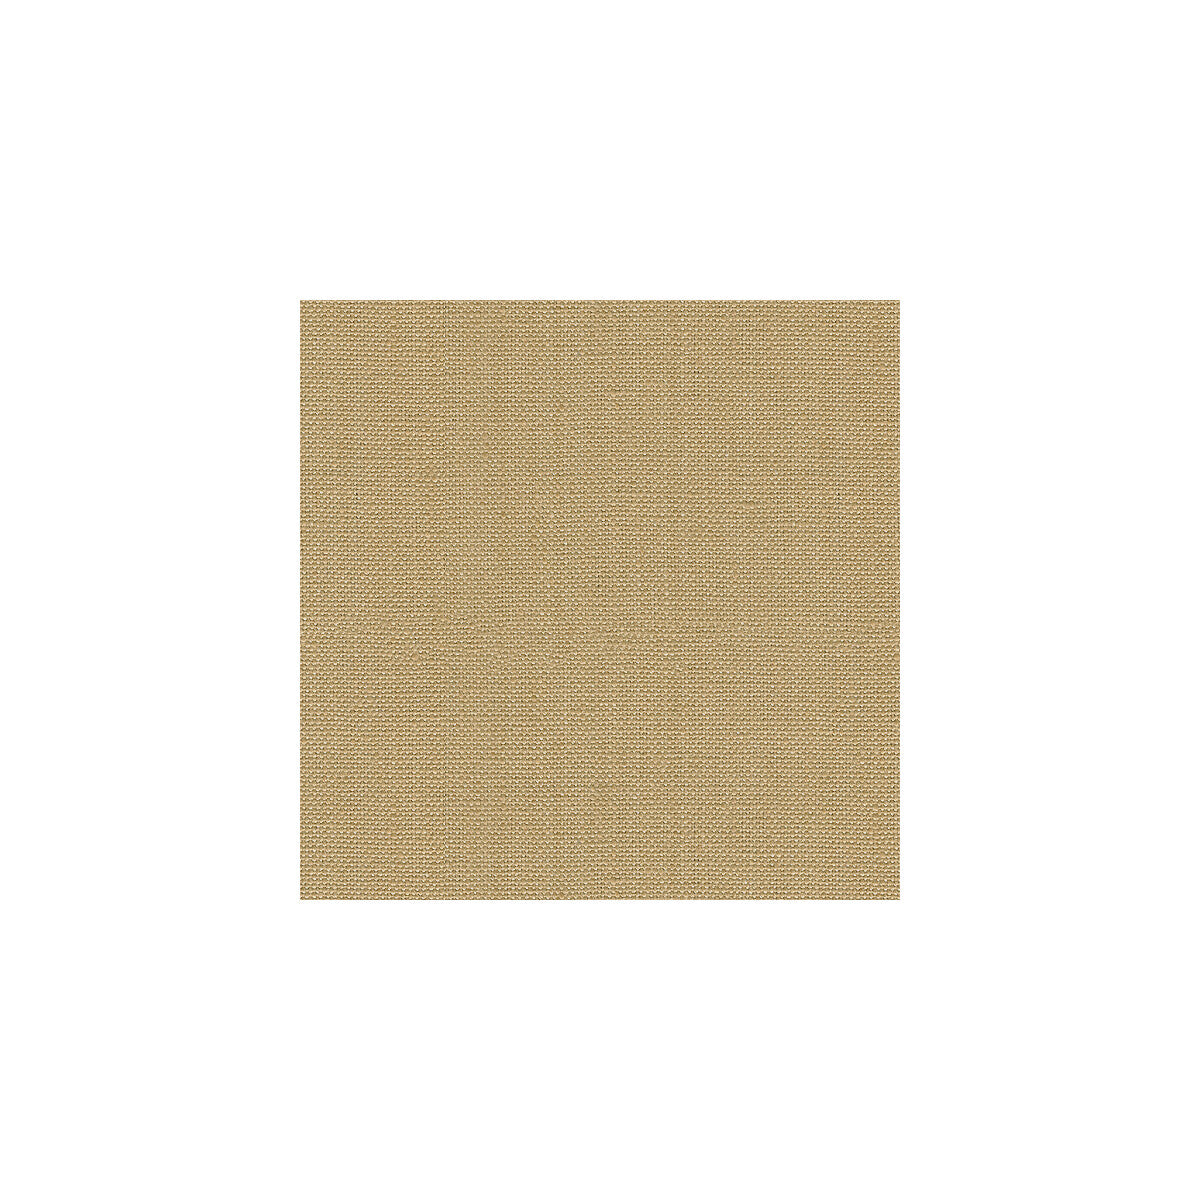 Watermill fabric in wheat color - pattern 30421.414.0 - by Kravet Basics in the Perfect Plains collection